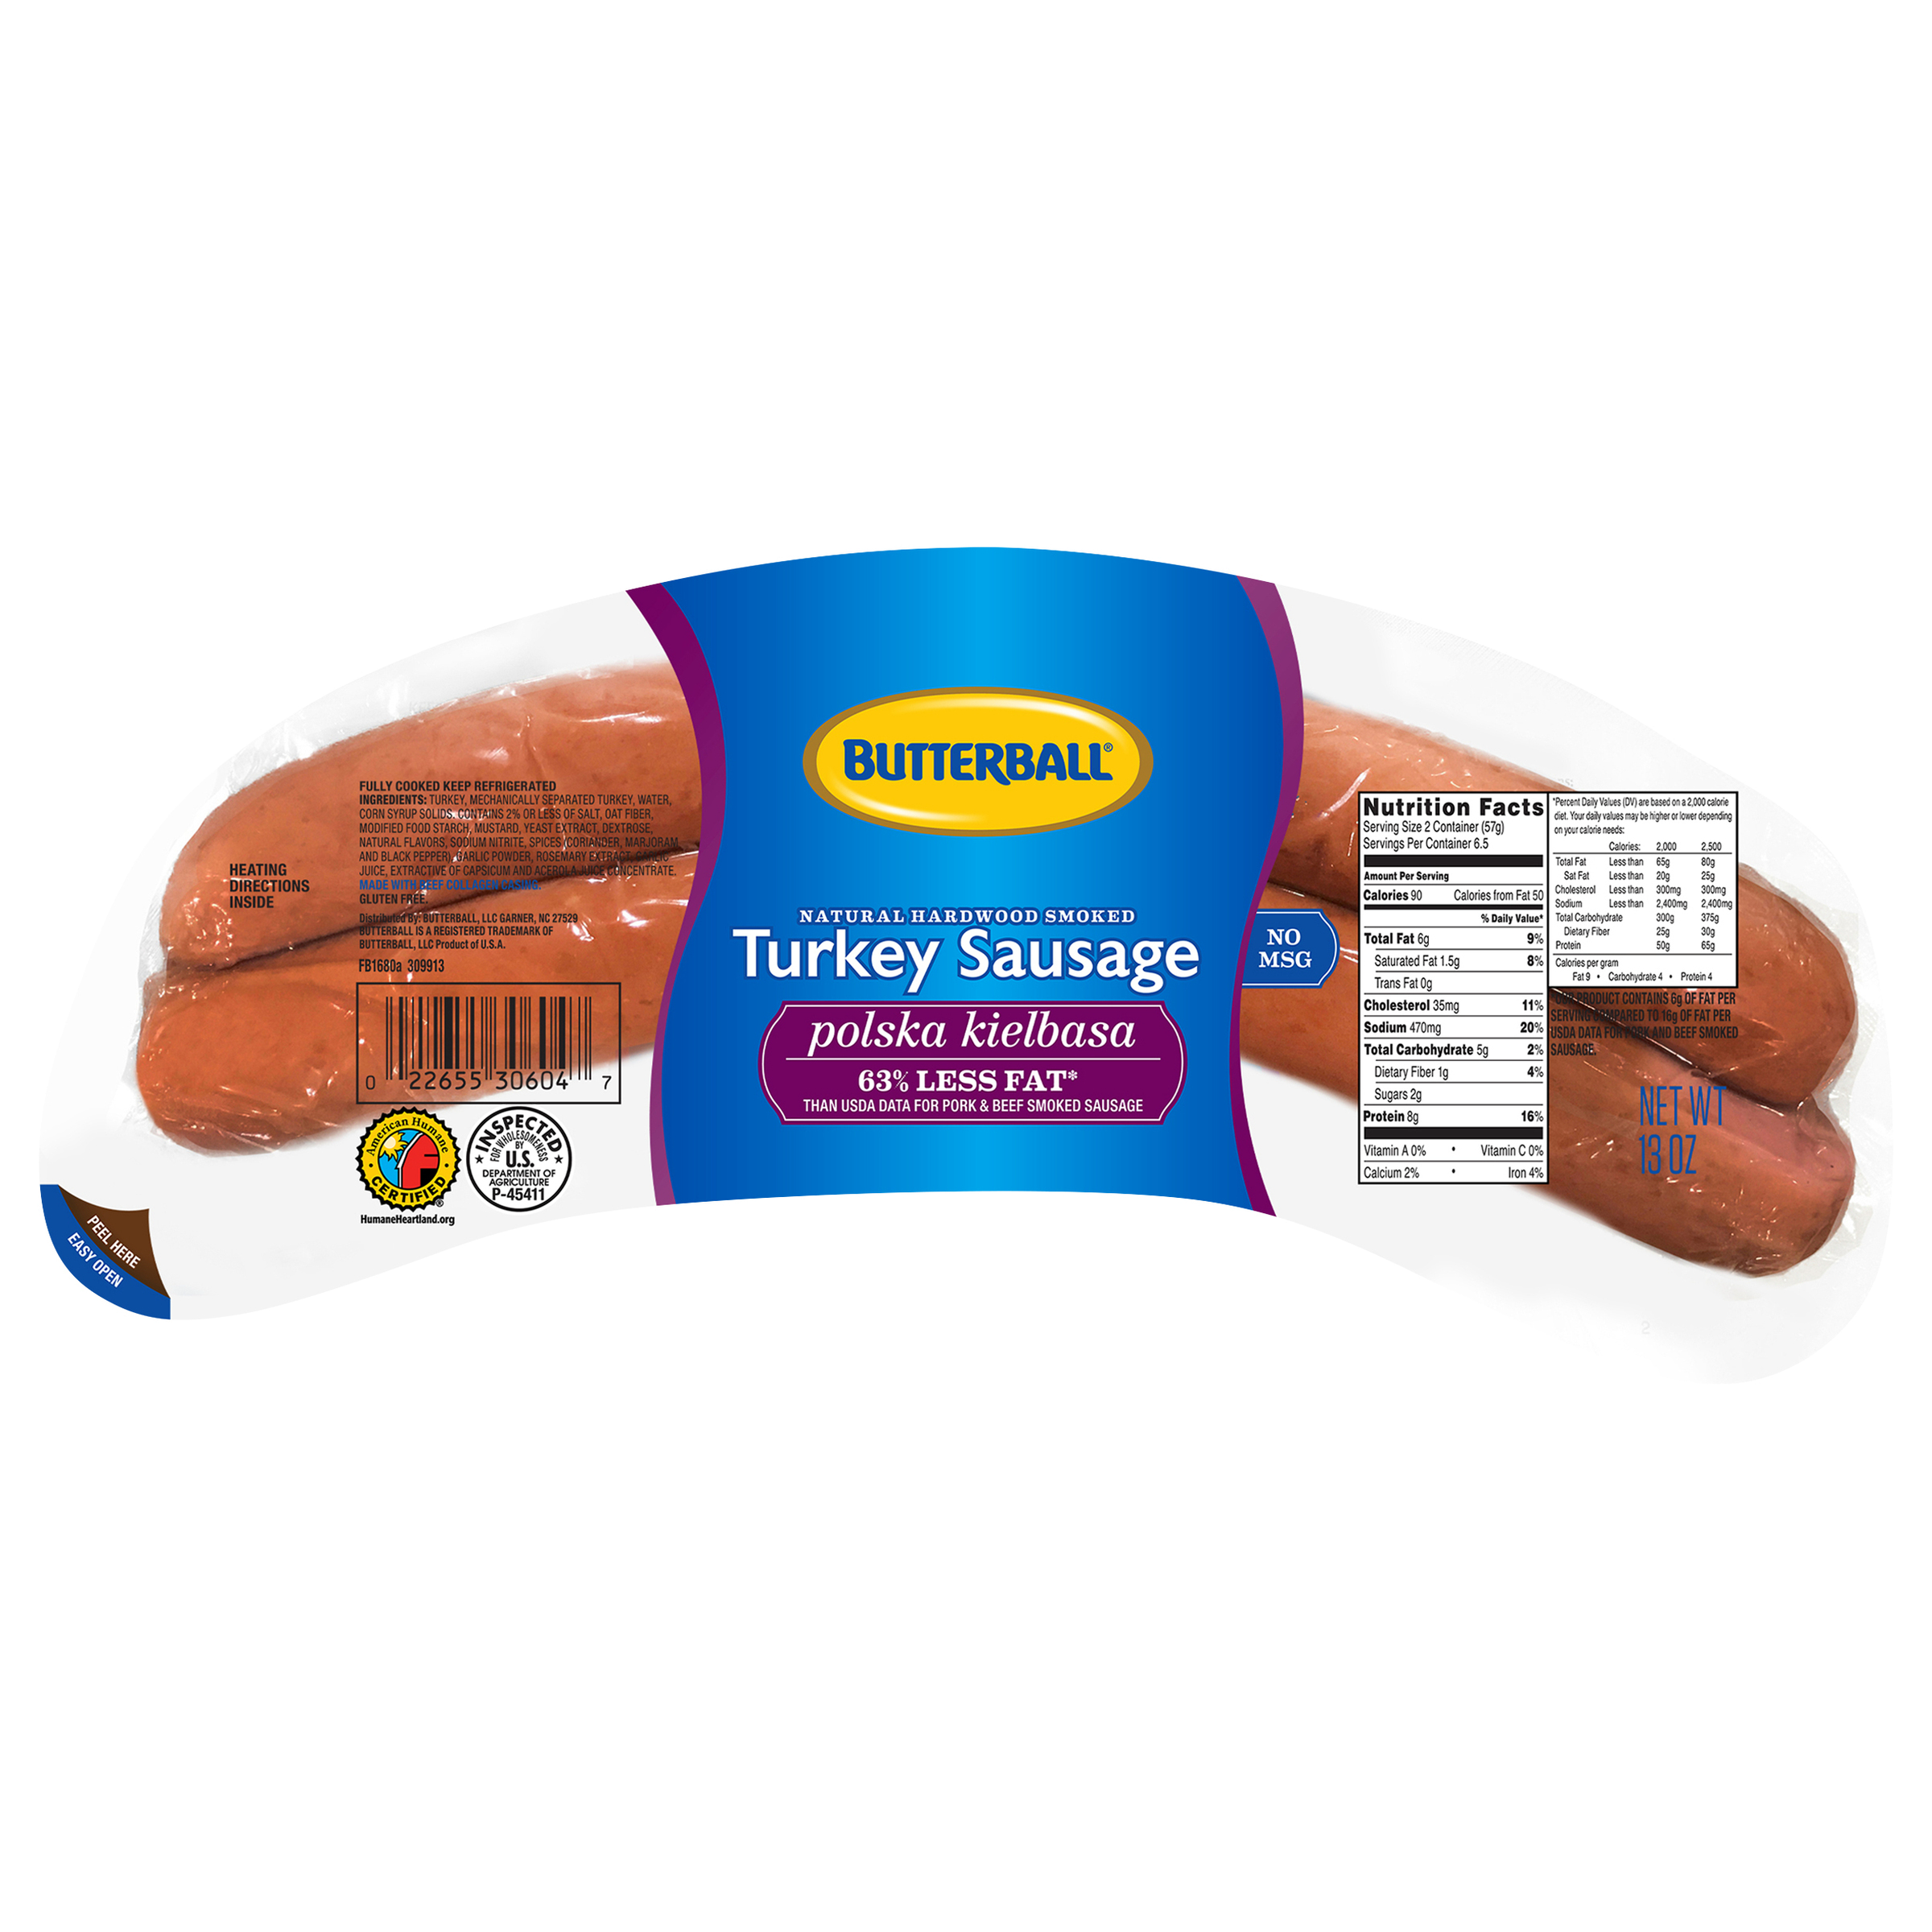 Butterball Turkey Sausage Sweet Italian Style Lean All Natural